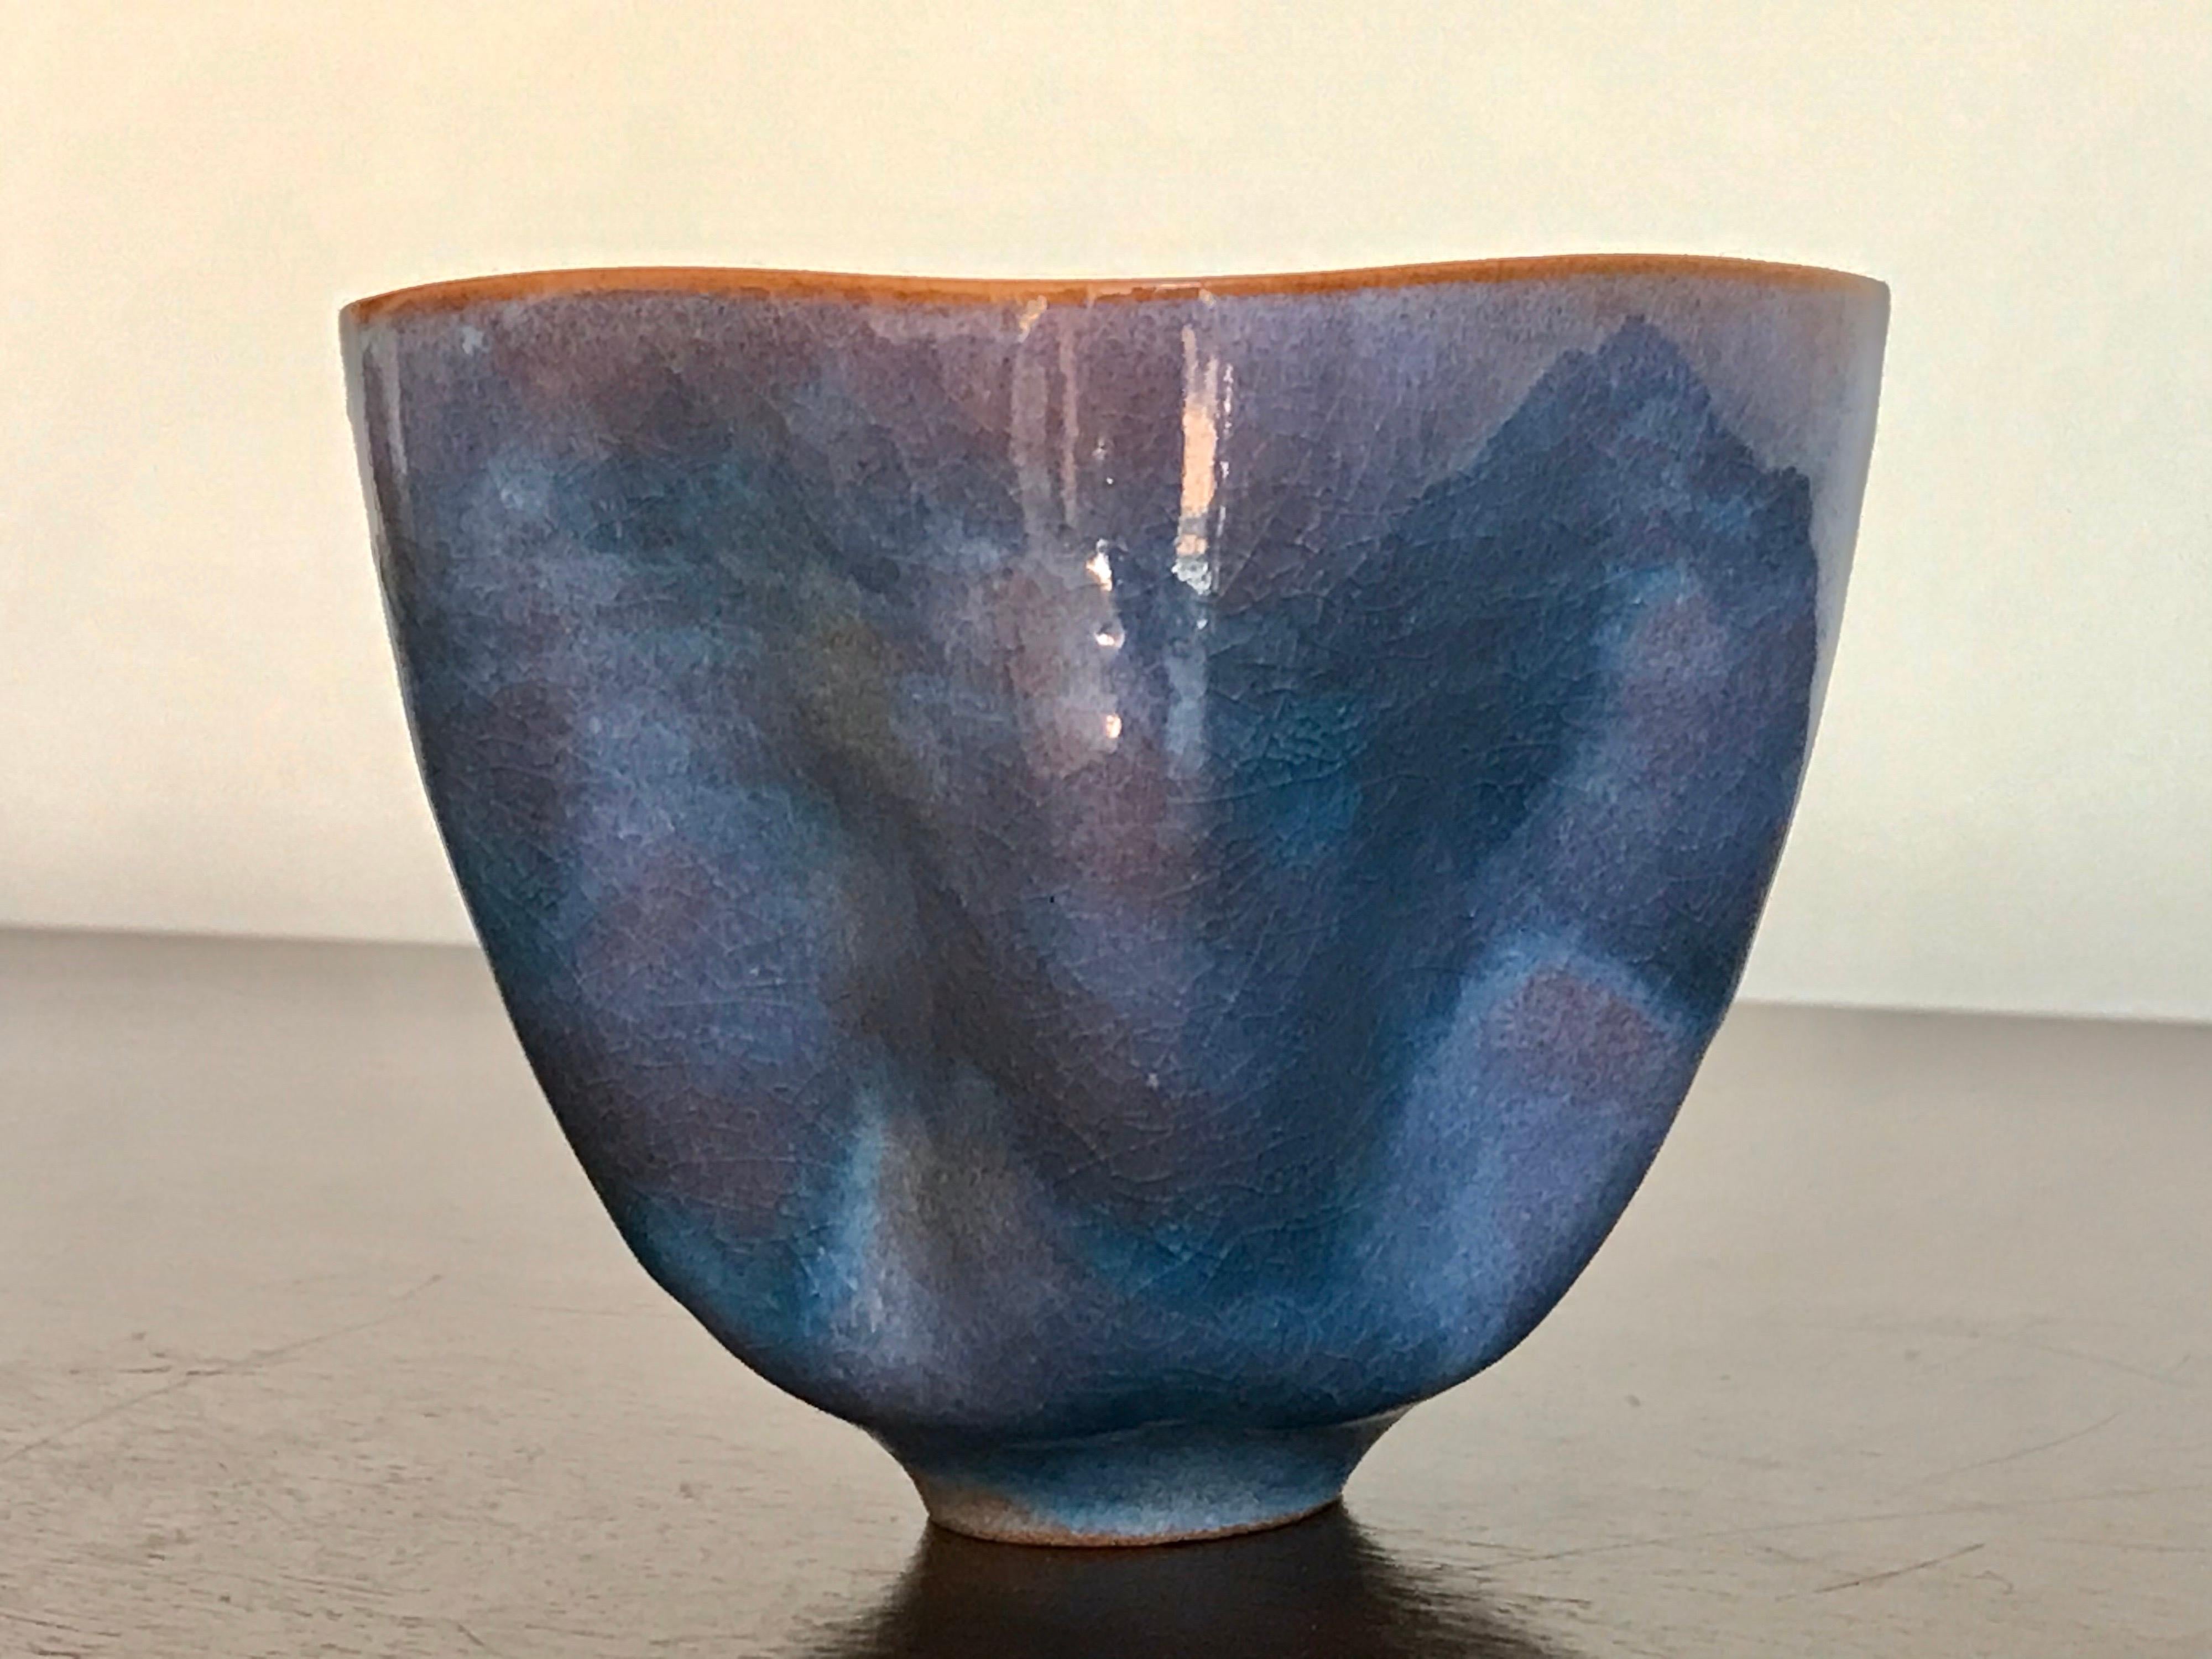 The Natzlers moved to Los Angeles from Austria in 1938. They were trained artisans. She made the simple pristine forms and he made the amazing glaze designs.
This piece here is an exceptional example of both of their applied techniques.
Wheel thrown